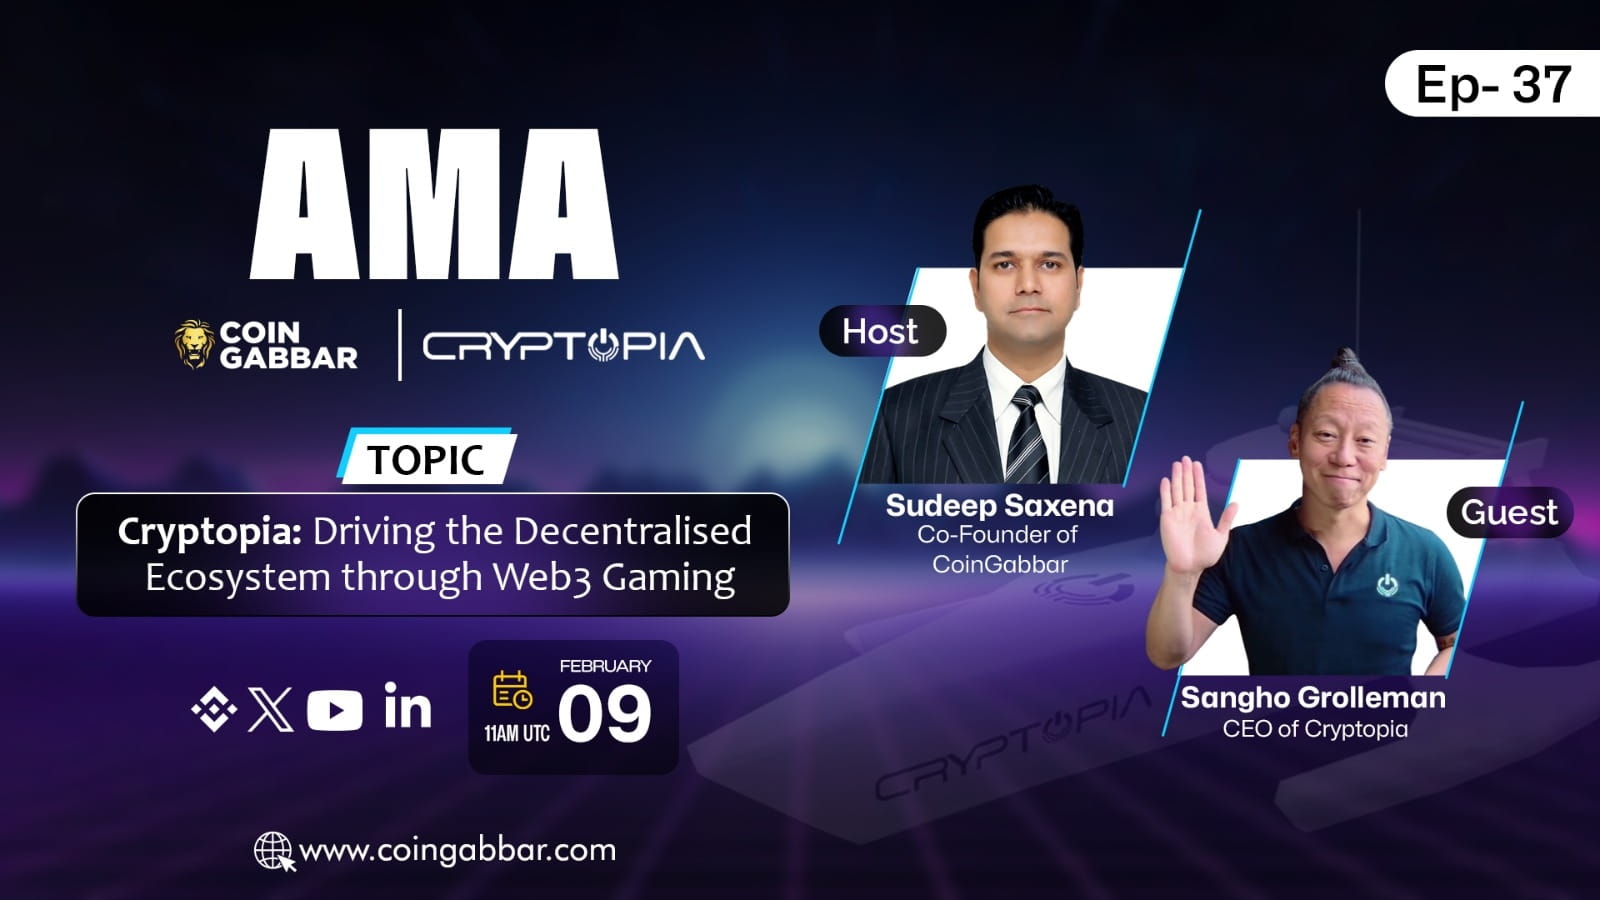  Cryptopia: Driving the Decentralised ecosystem through Web3 gaming